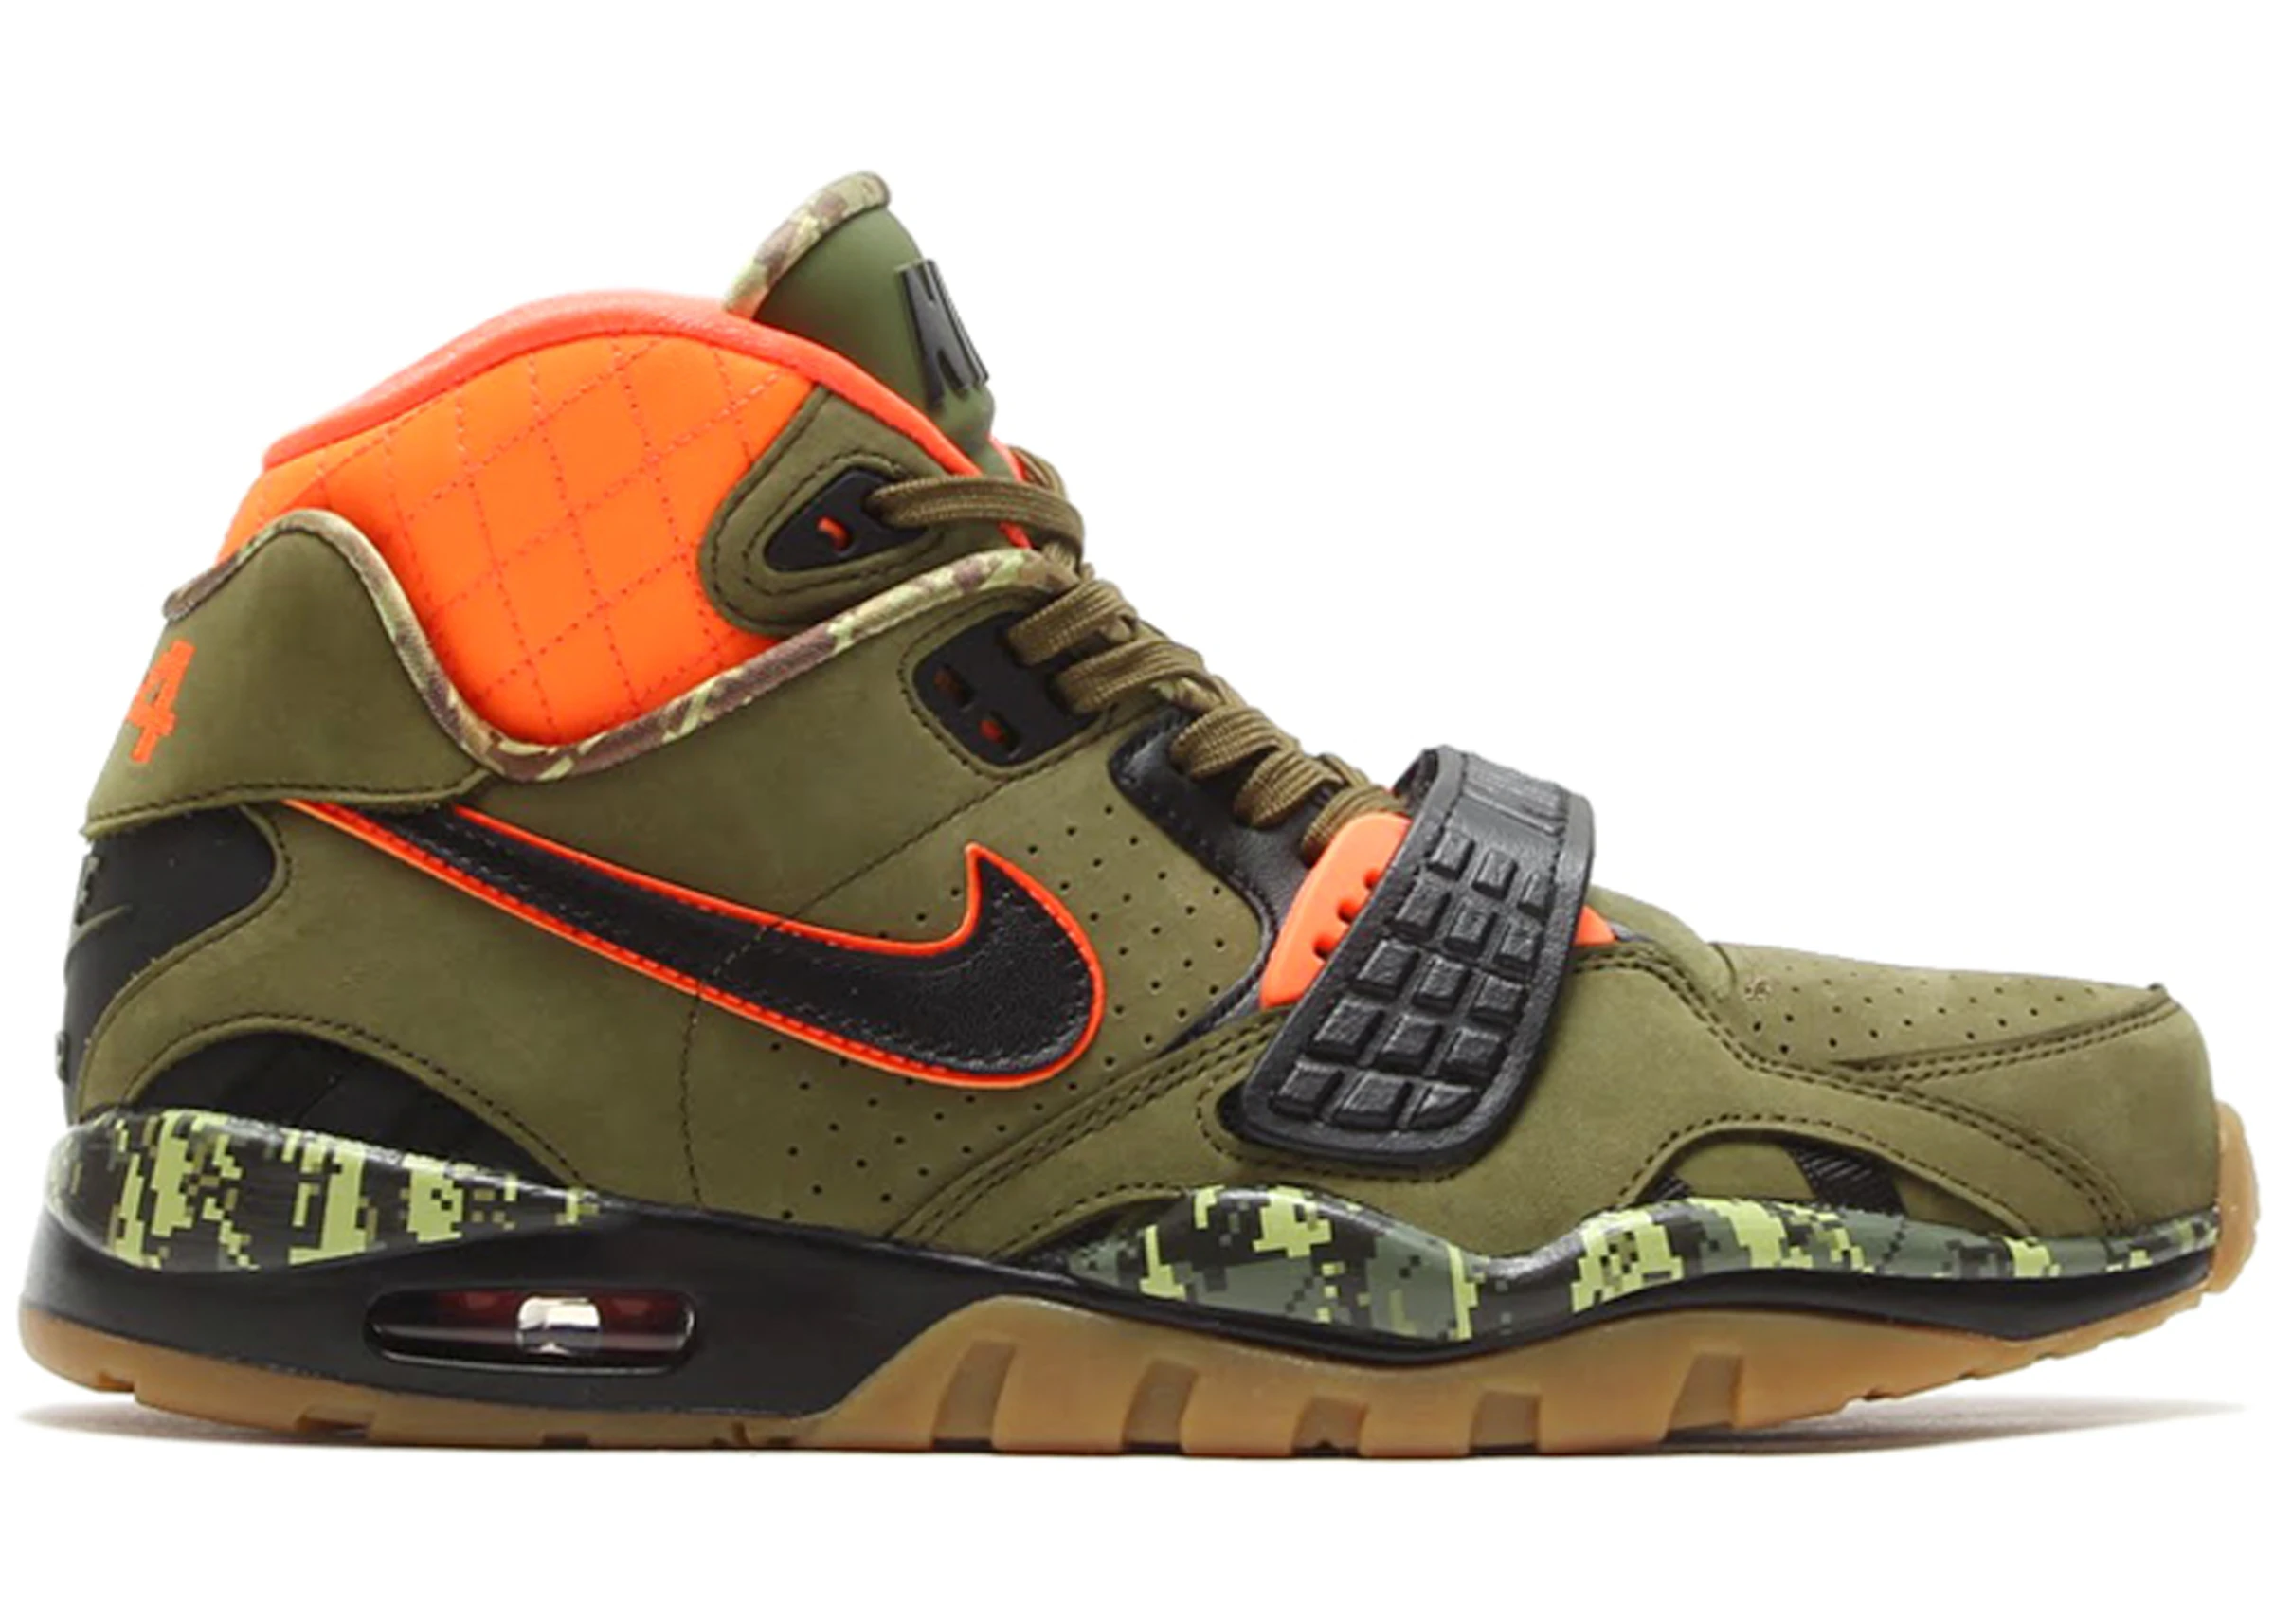 Nike Air Trainer SC 2 Bo and Arrows - 637804-300 - ES